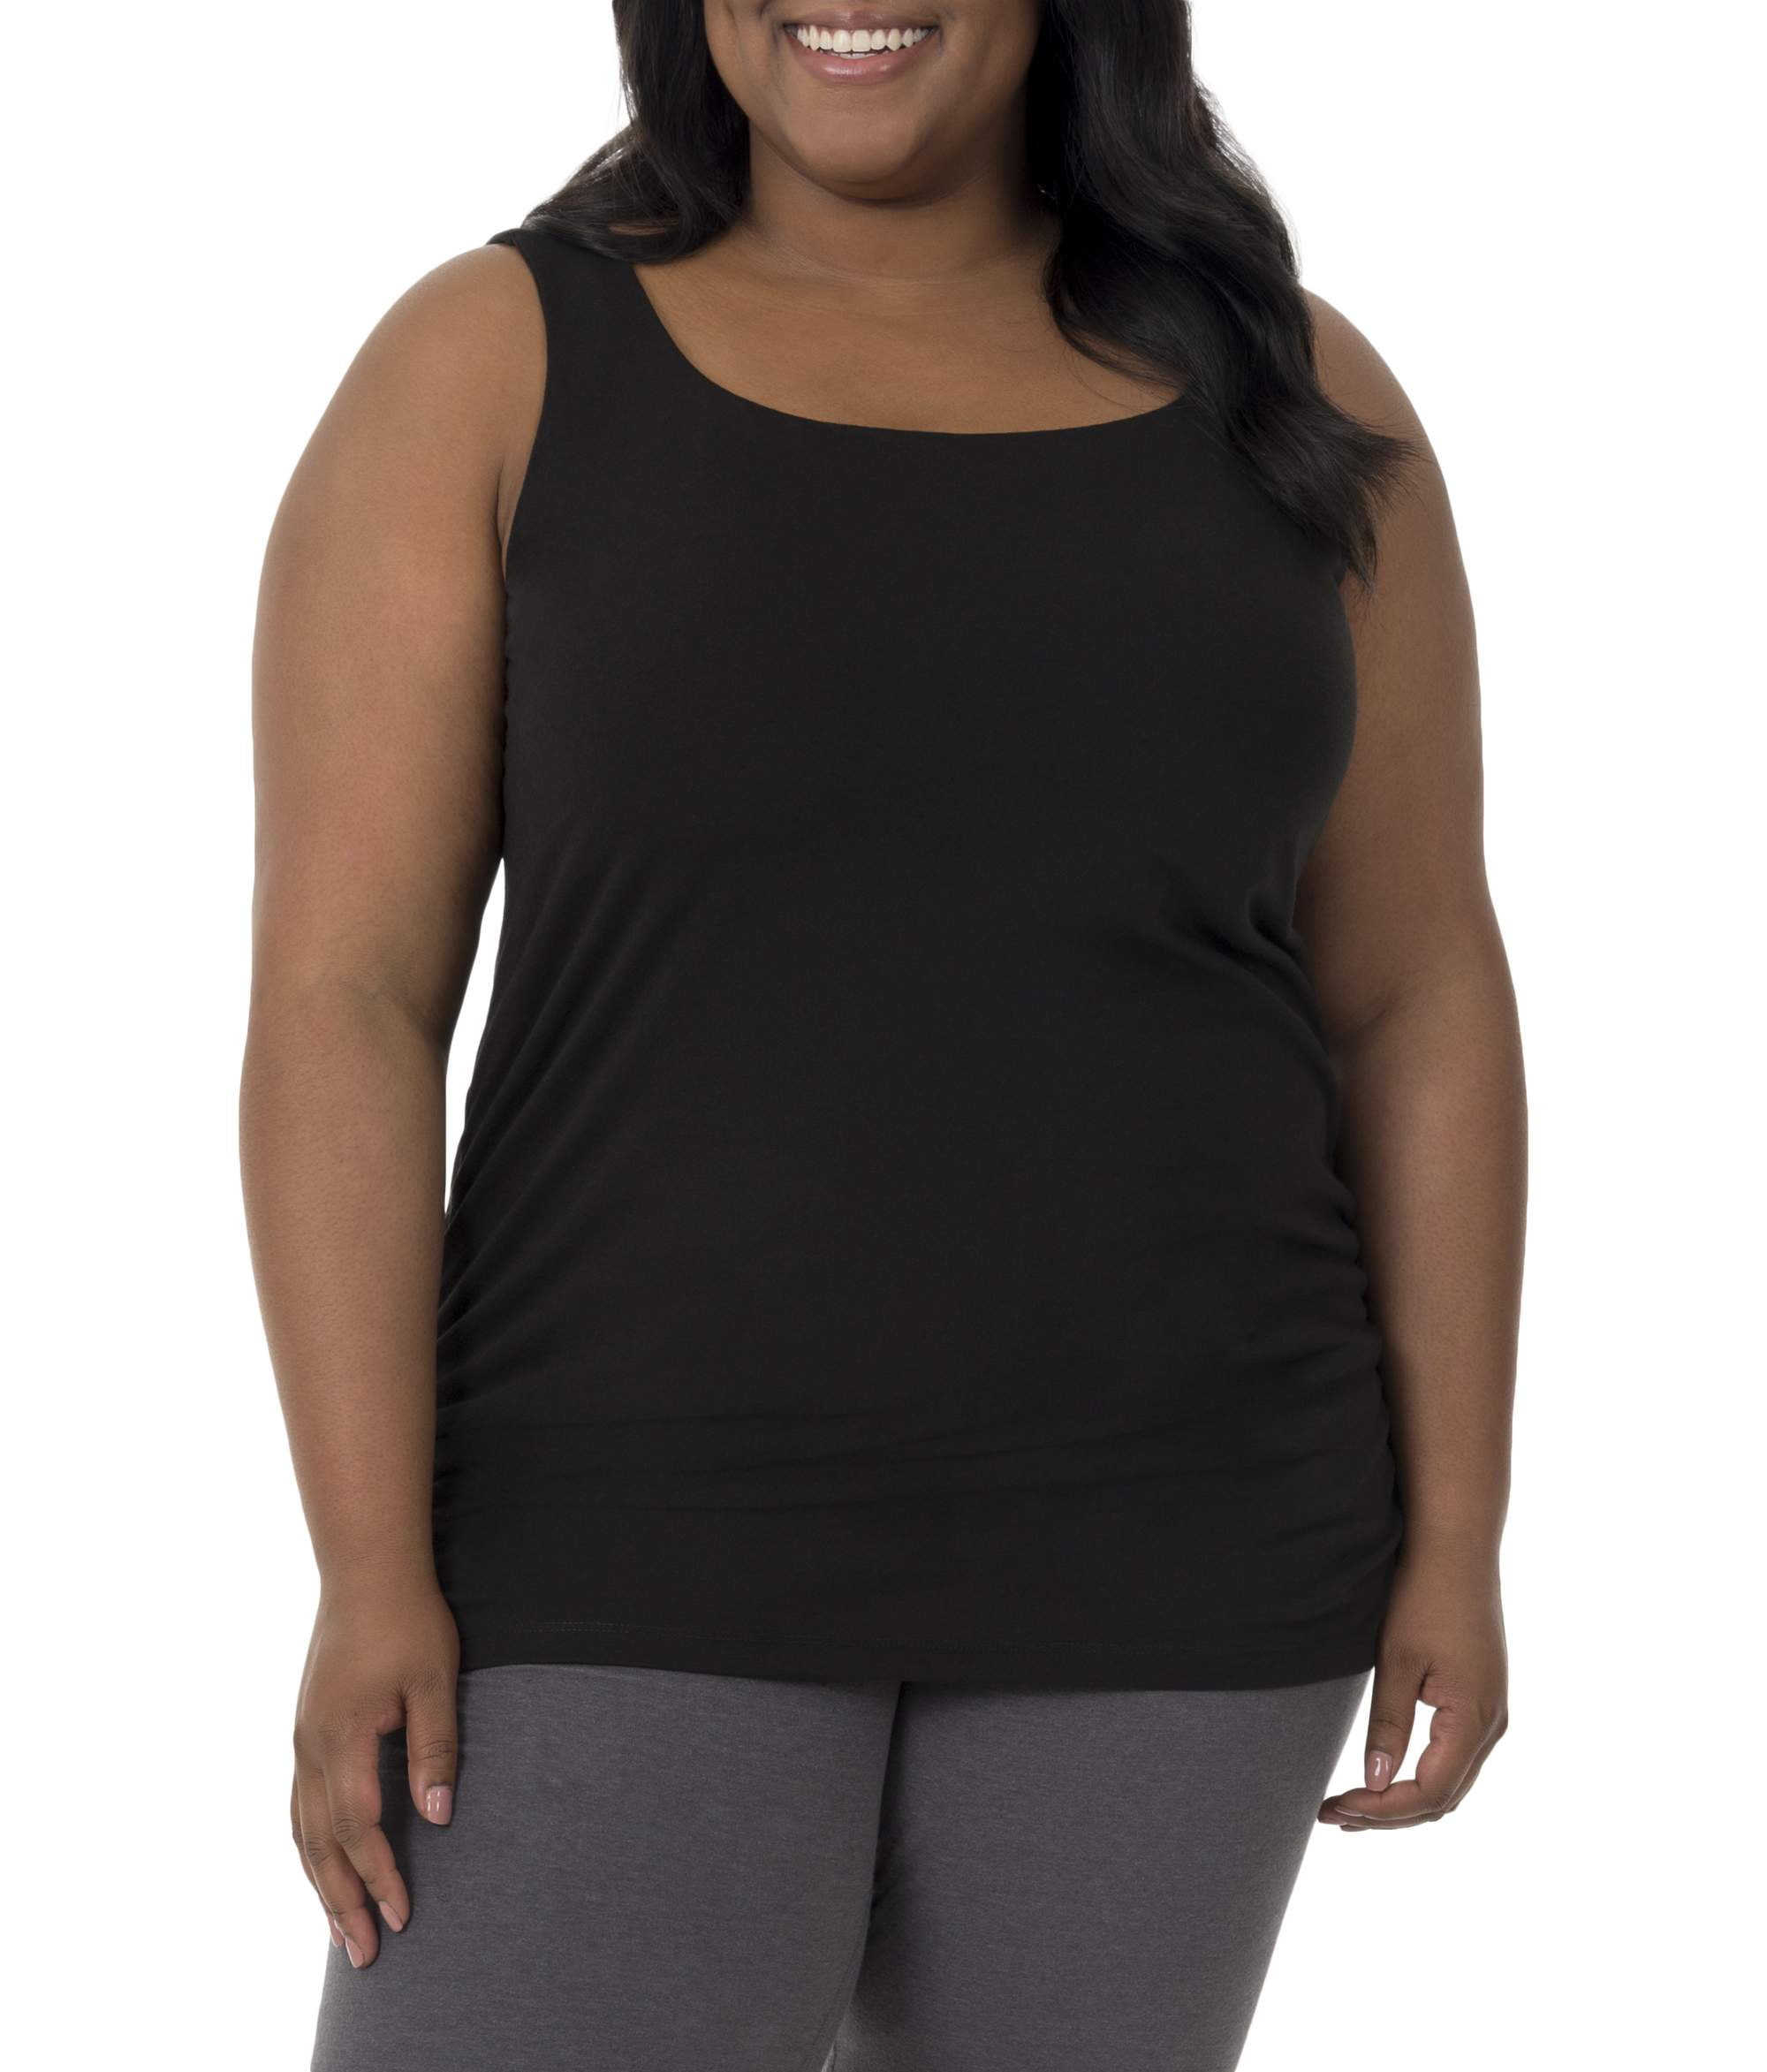 Fruit of the Loom Womens Plus Size Fit for Me Core Performance Thermal Top